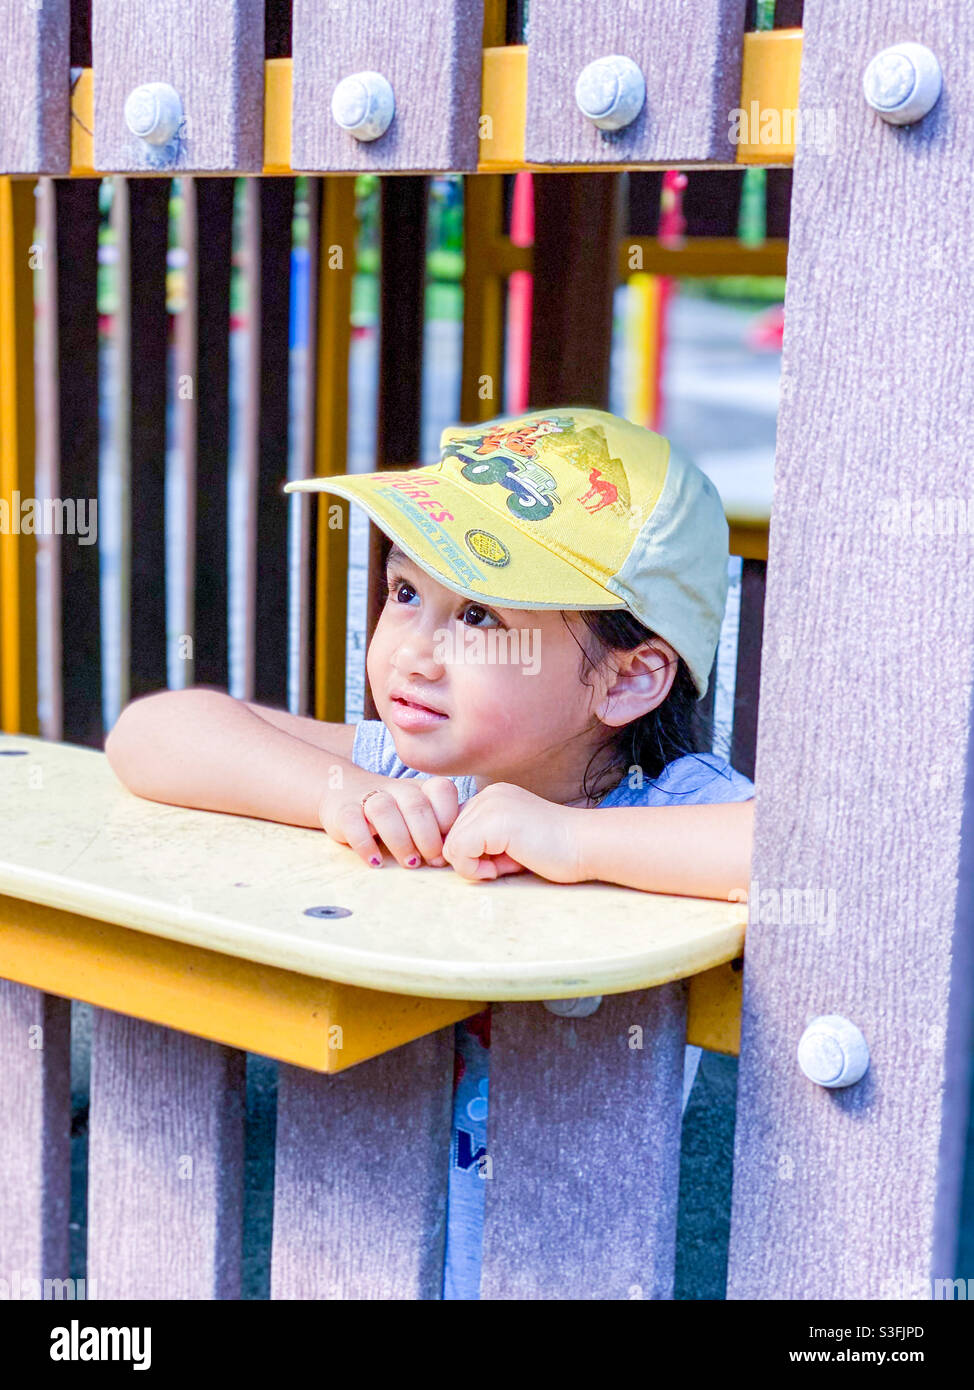 Little girl at the playground dreaming away Stock Photo